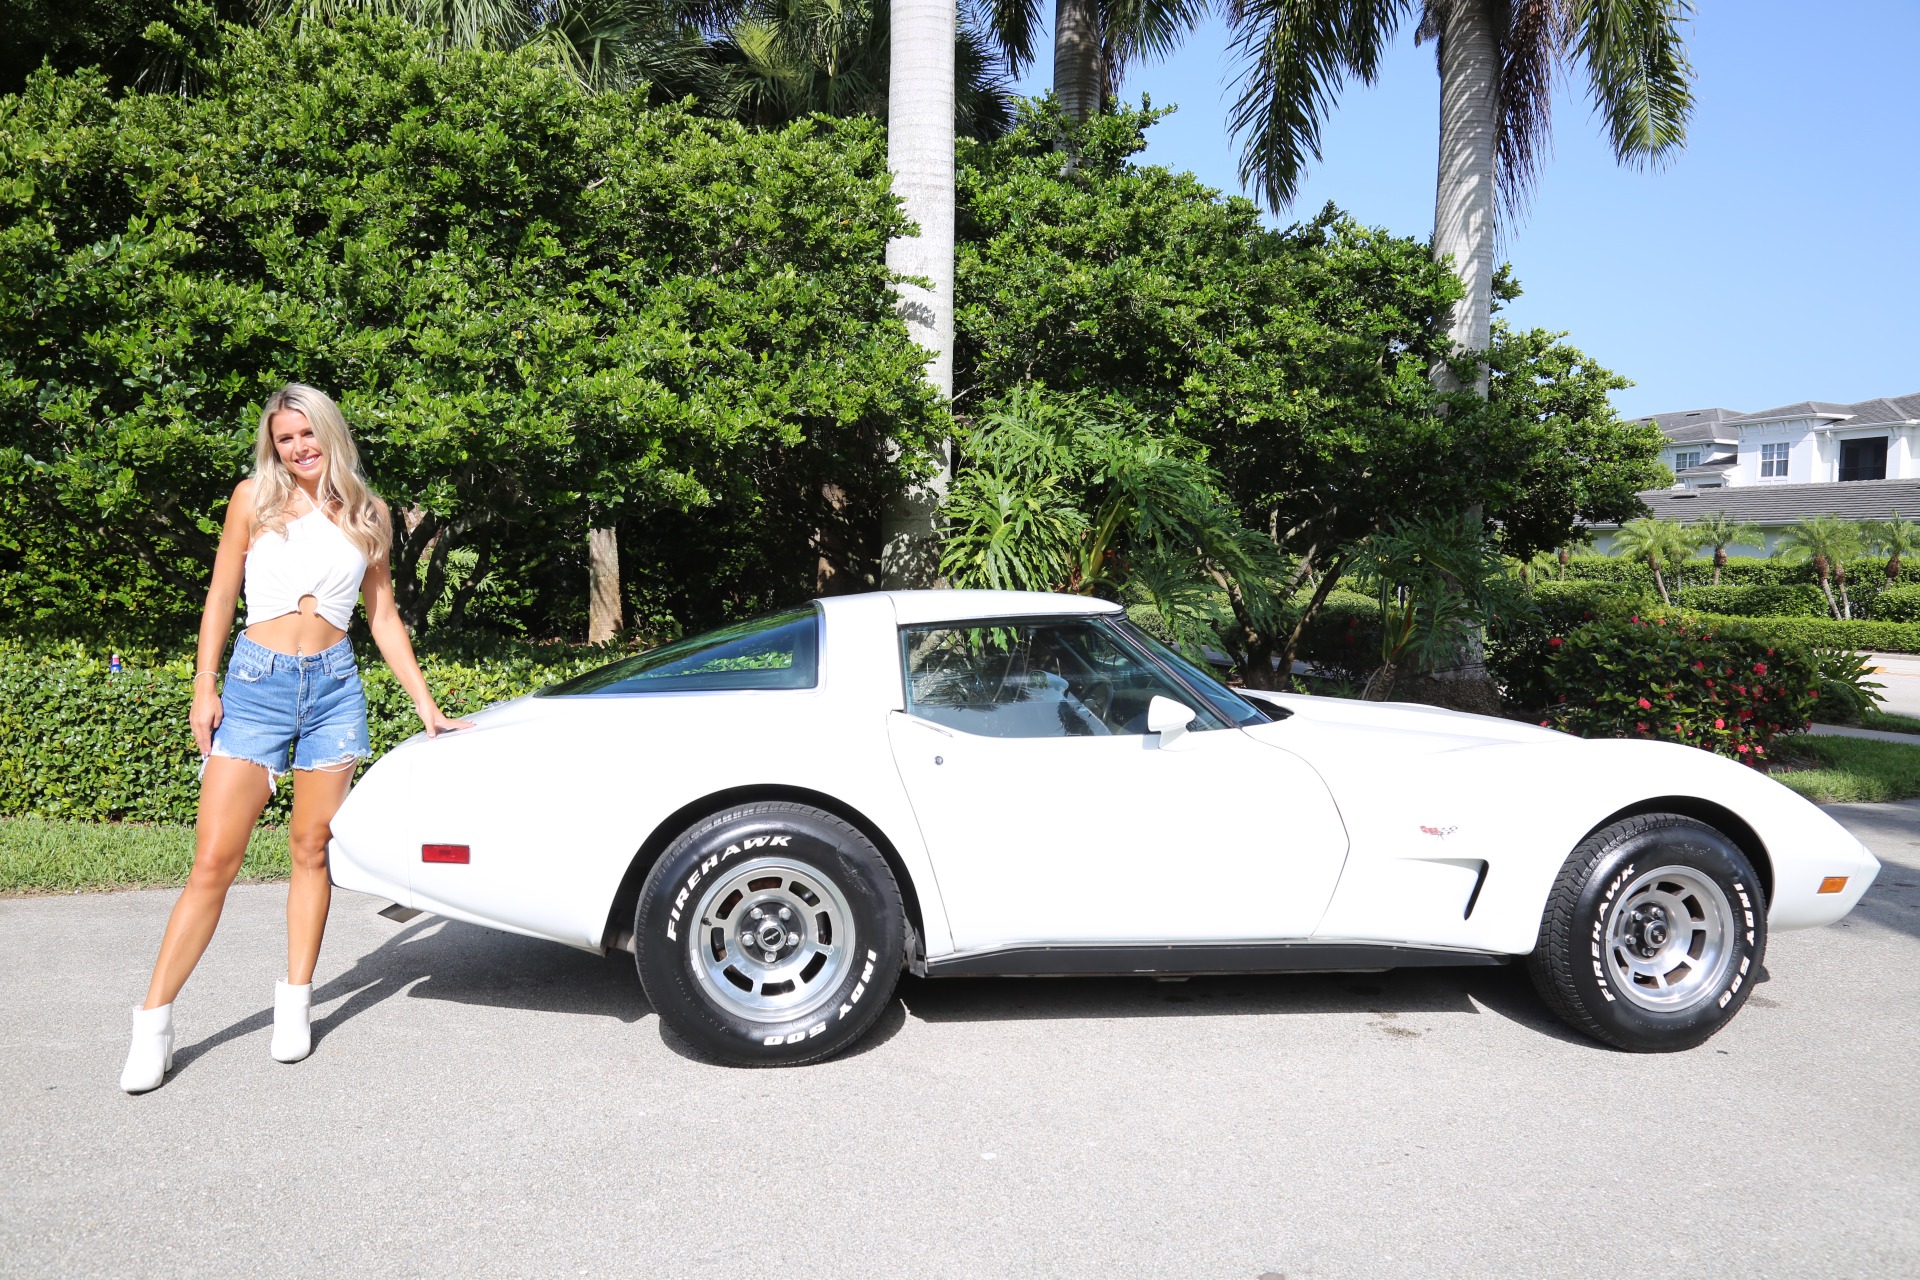 Used 1978 Chevrolet Corvette Anniversary Edition for sale $15,800 at Muscle Cars for Sale Inc. in Fort Myers FL 33912 3